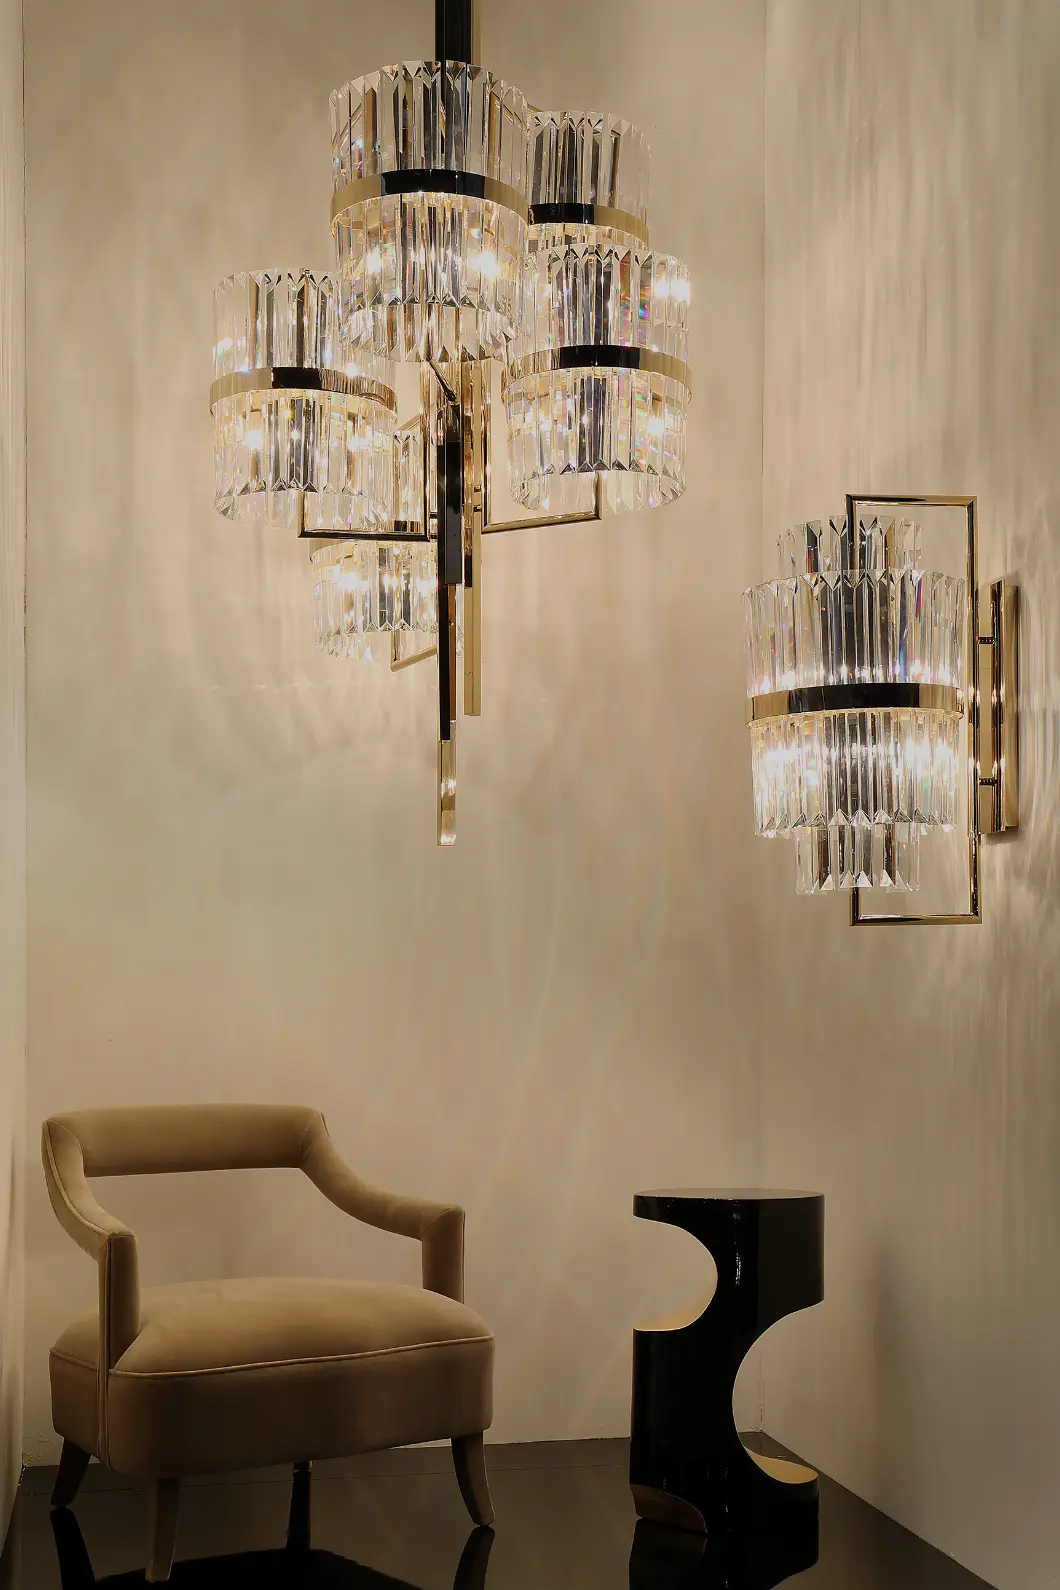 Chandeliers with vigorous personality